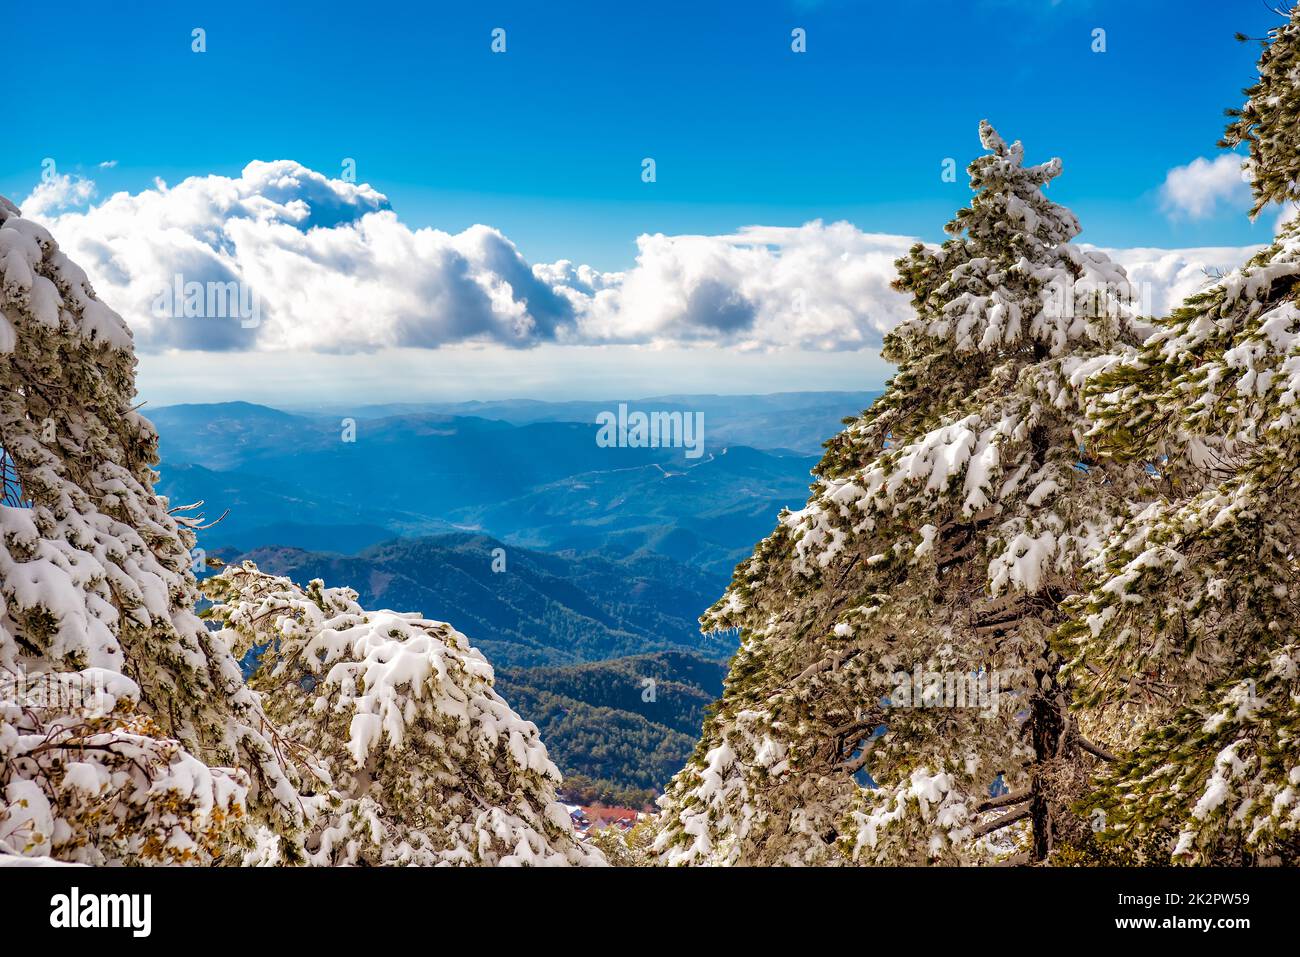 Beautiful scenic winter mountain landscape of Troodos mountains. Cyprus Stock Photo